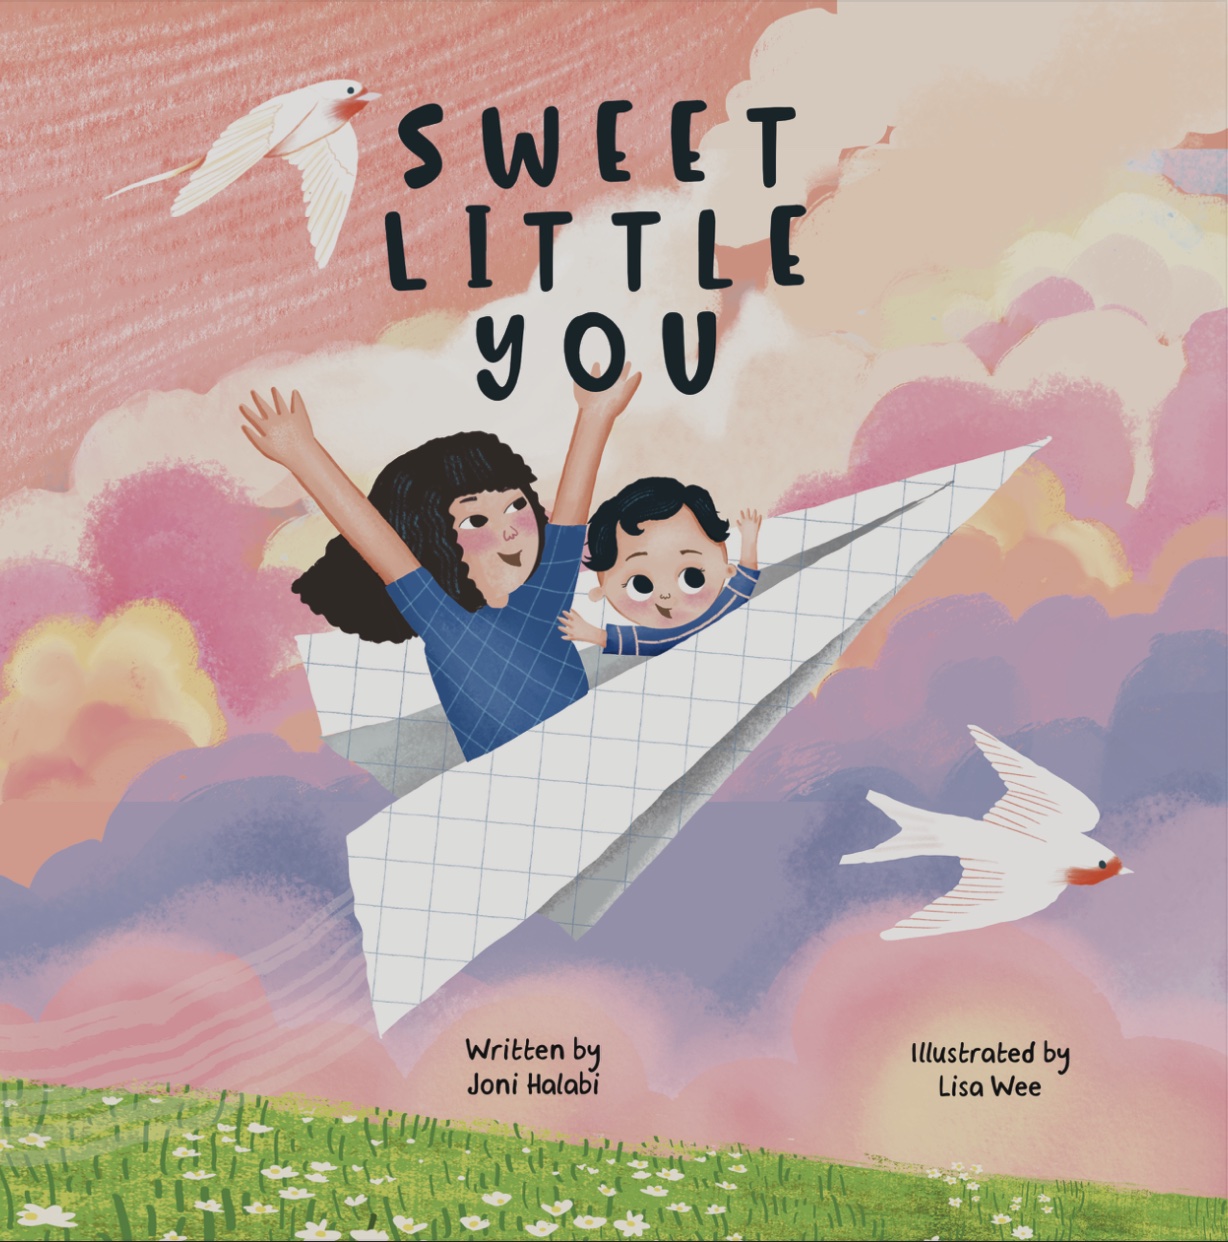 Book cover of Sweet Little You featuring a mom and baby flying over a field in a paper airplane